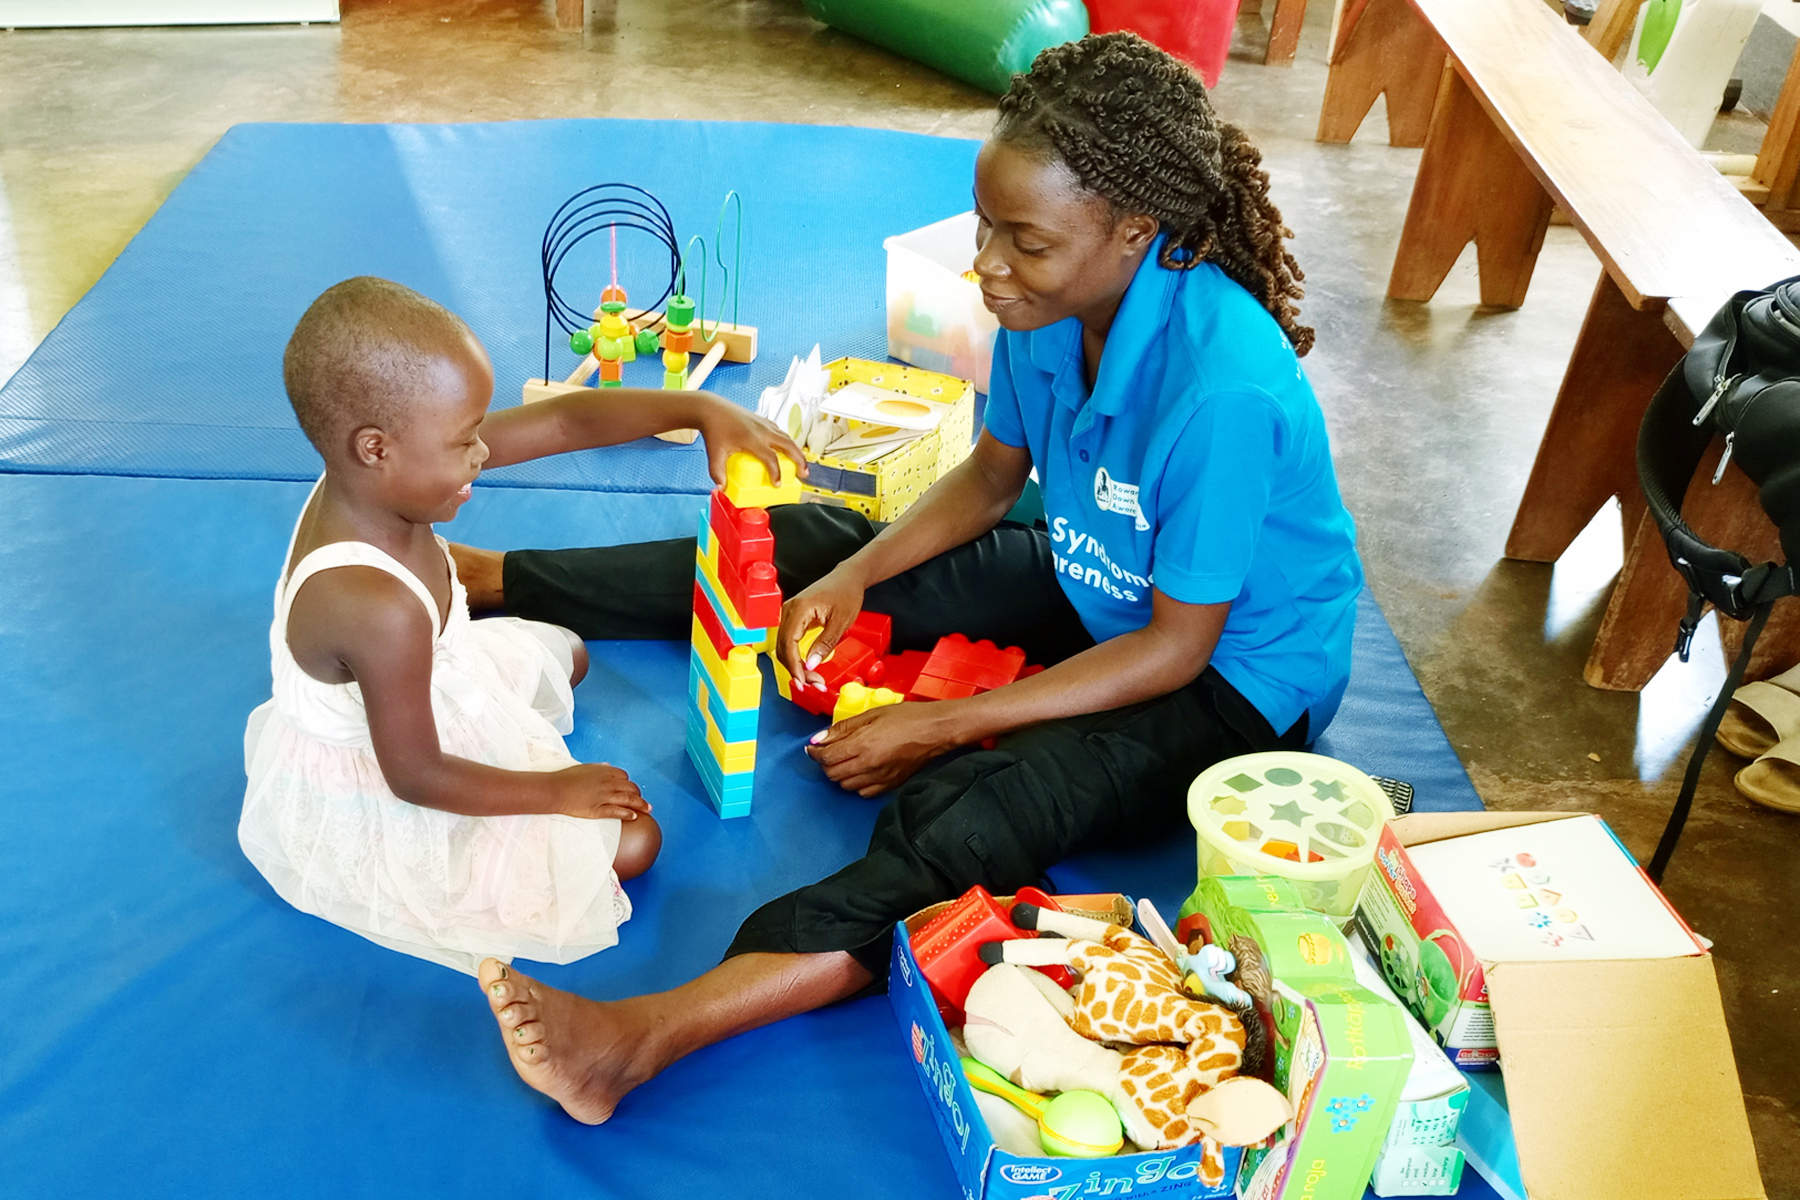 Our speech therapist having a session with one of our members at Masindi Hospital.